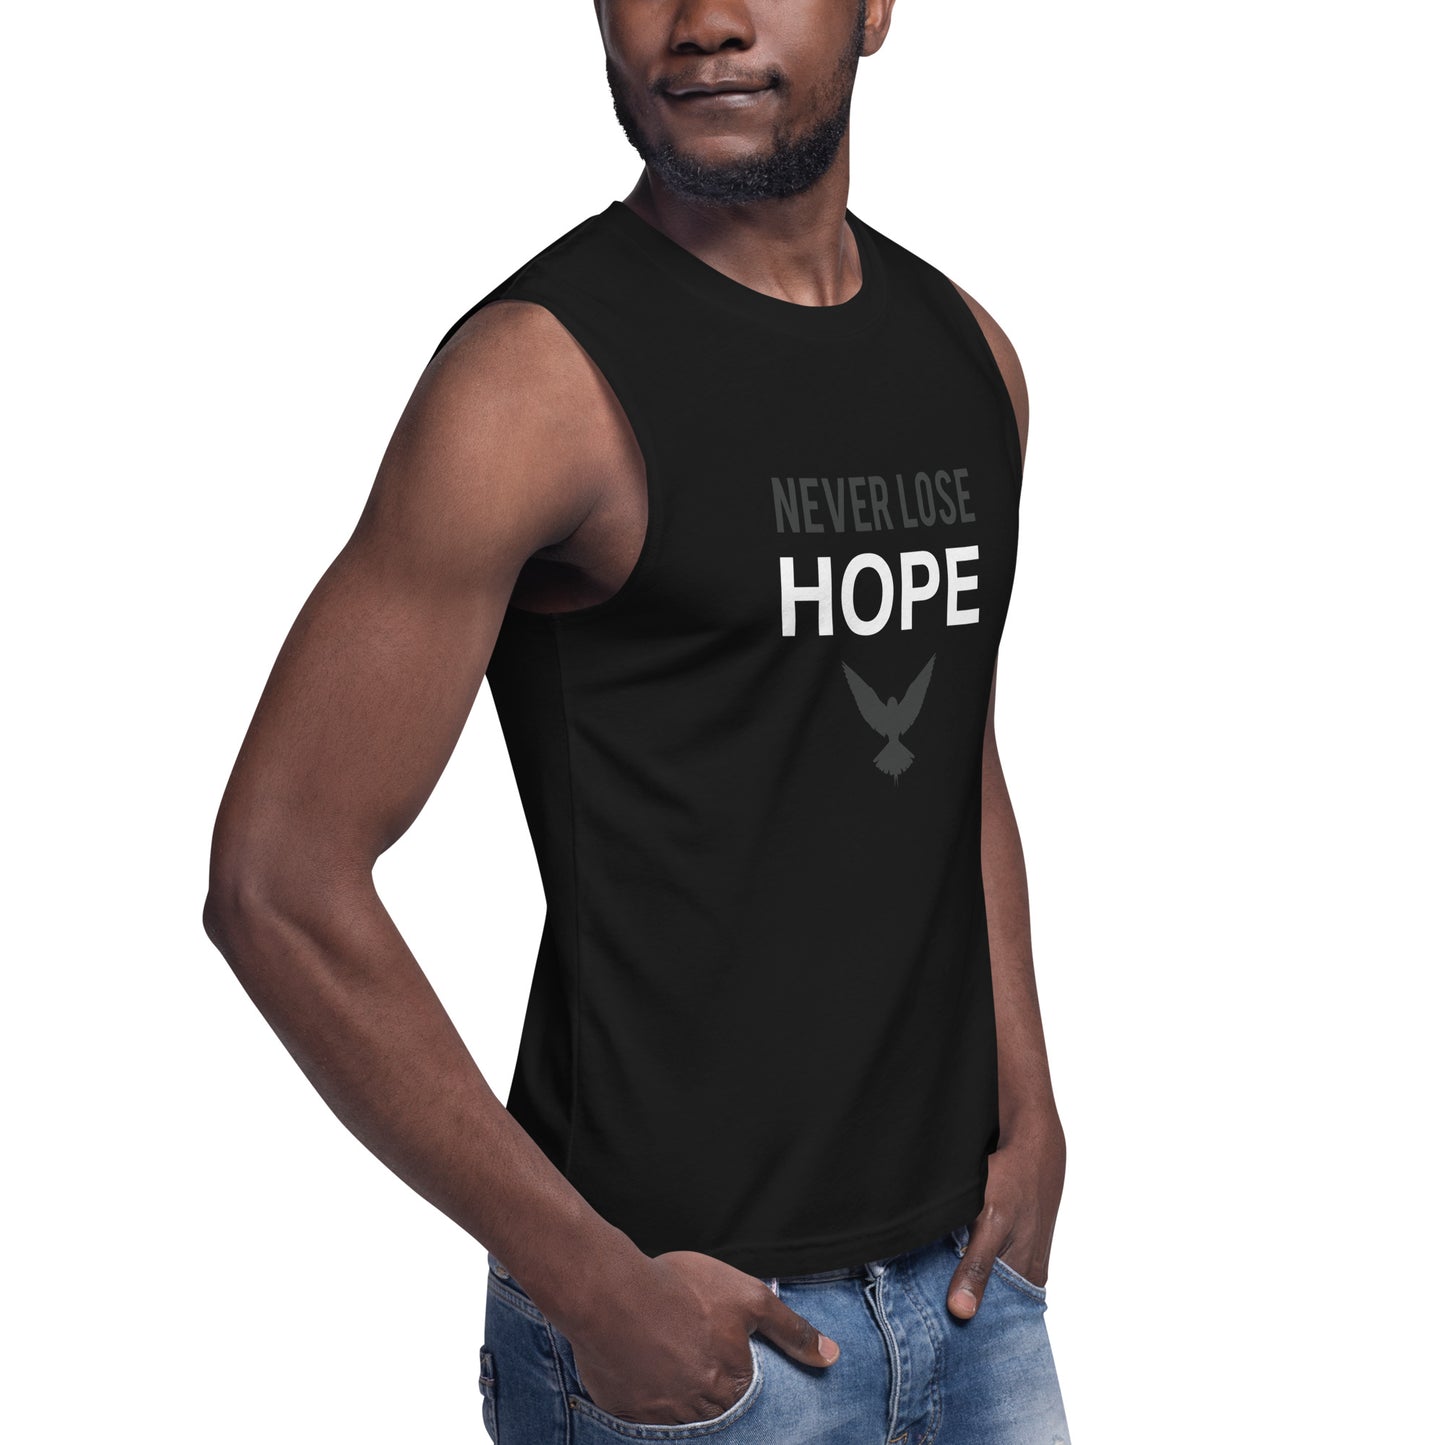 NEVER LOSE HOPE Muscle Shirt (Gray)